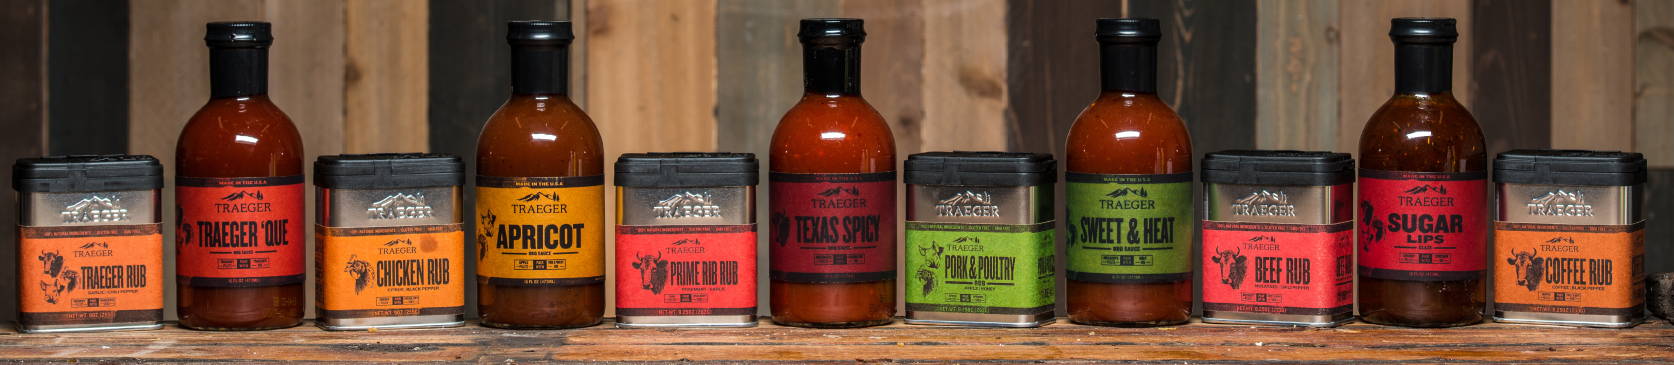 Traeger rubs and sauces 